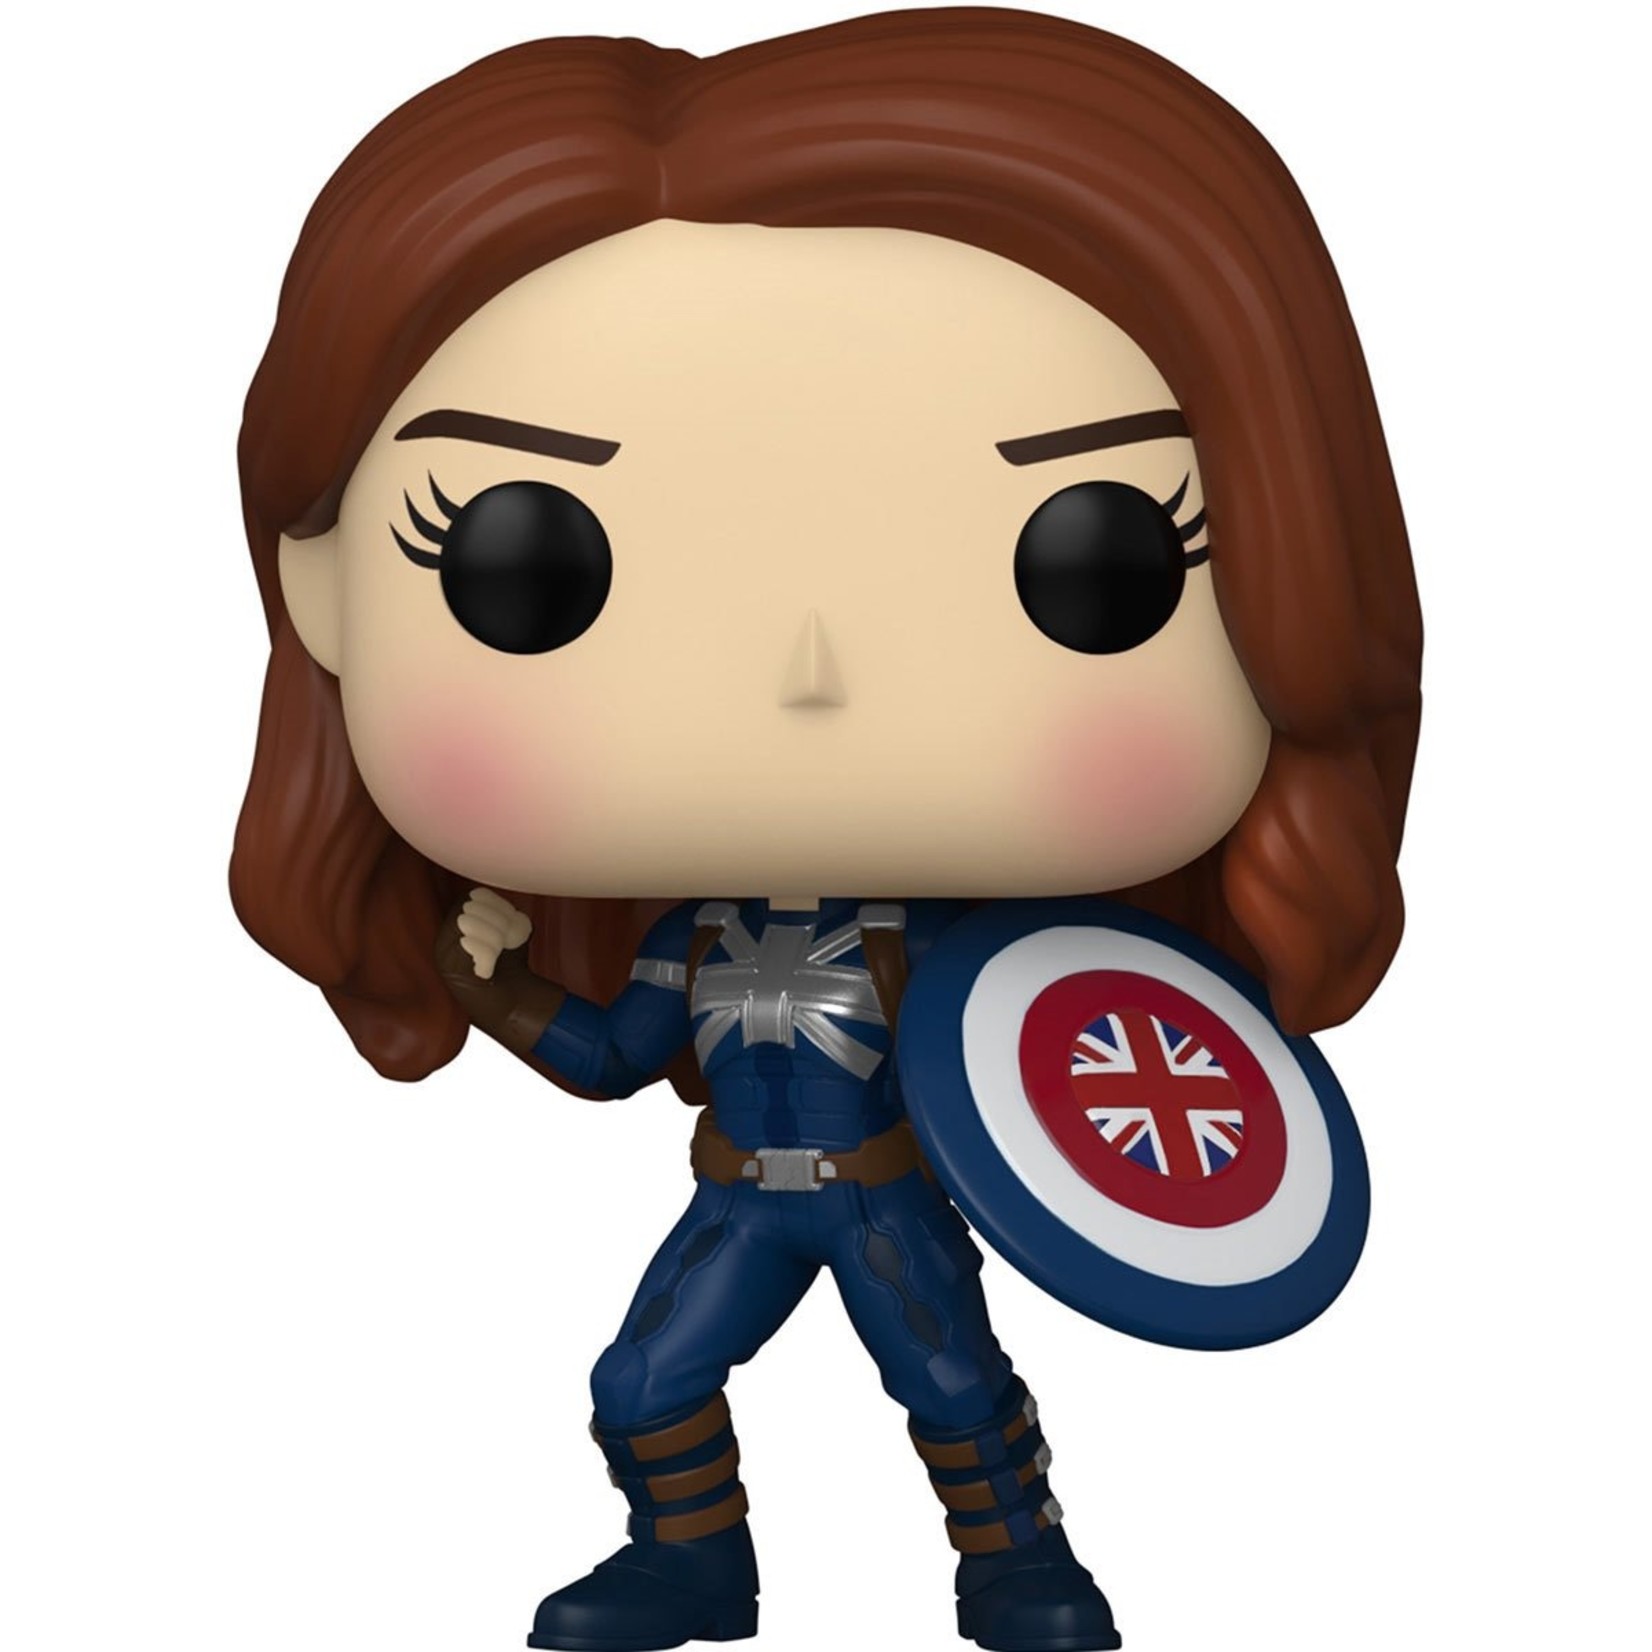 Funko Funko Pop! What if...? 968 - Captain Carter Stealth Suit